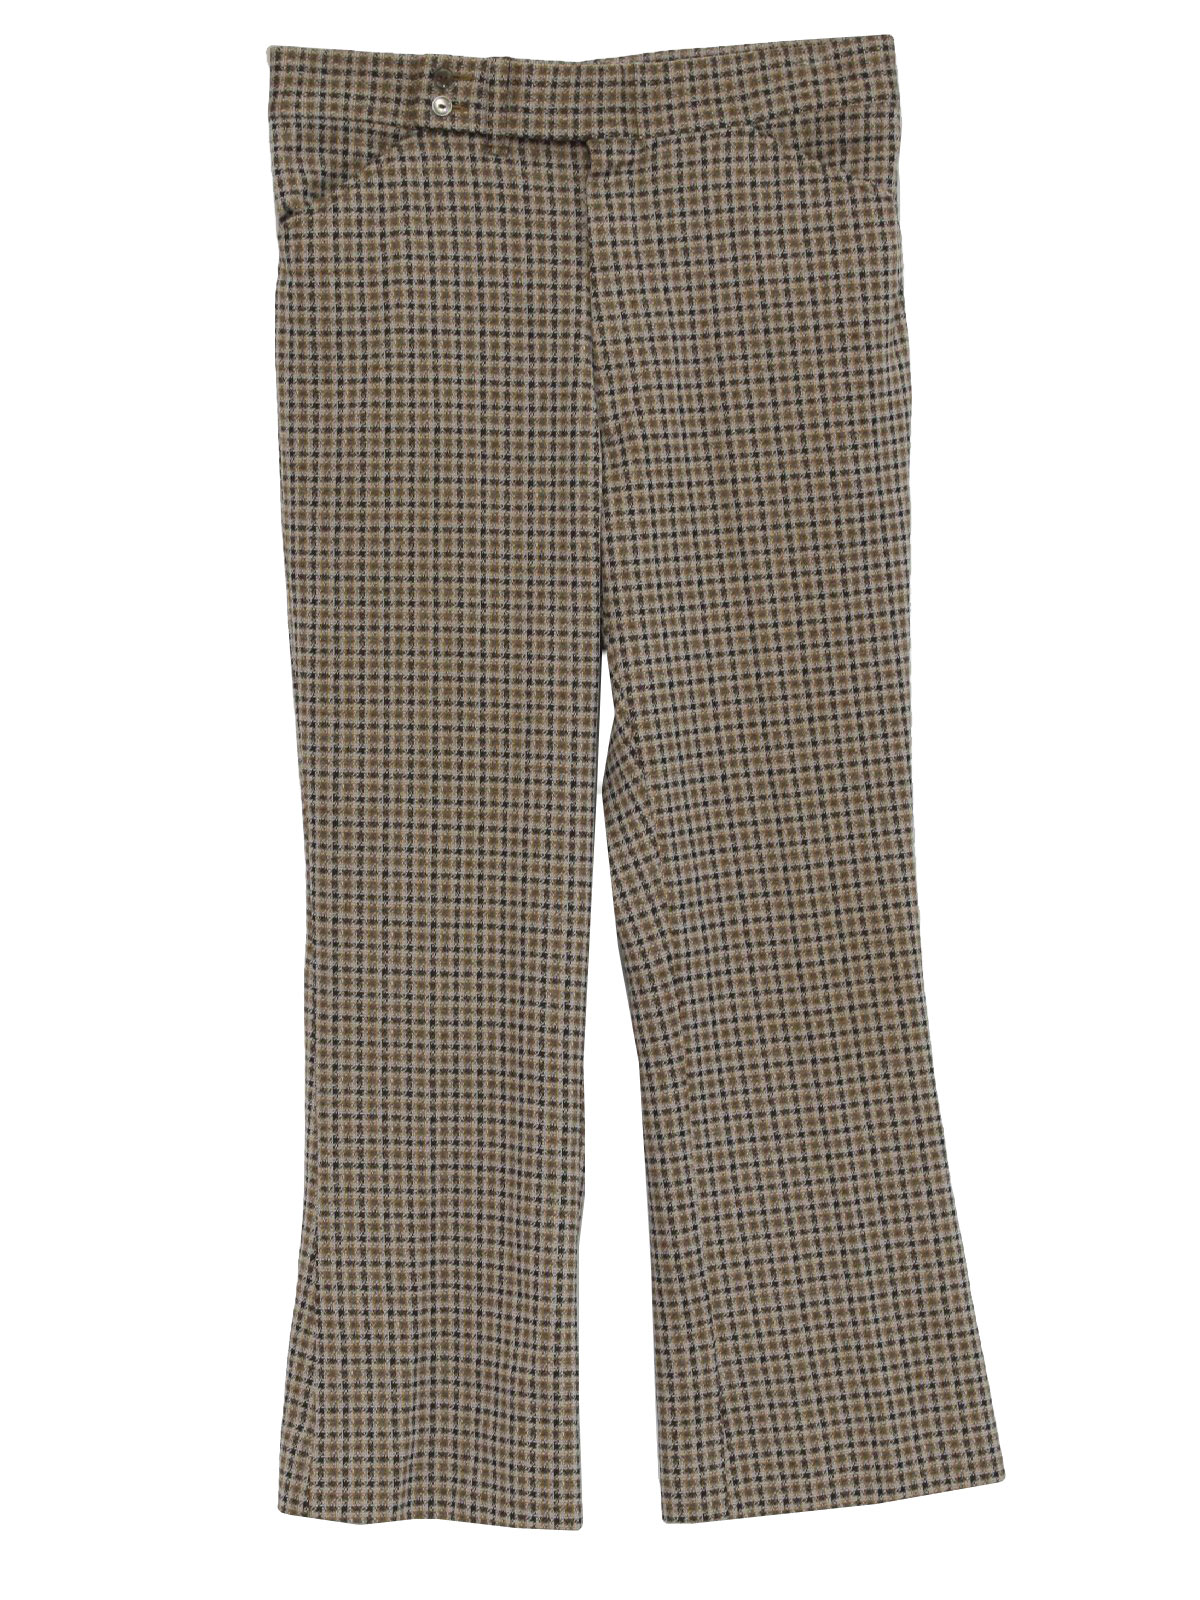 Retro 70's Pants: 70s -Care Label Only- Mens tan, dark brown, grey and ...